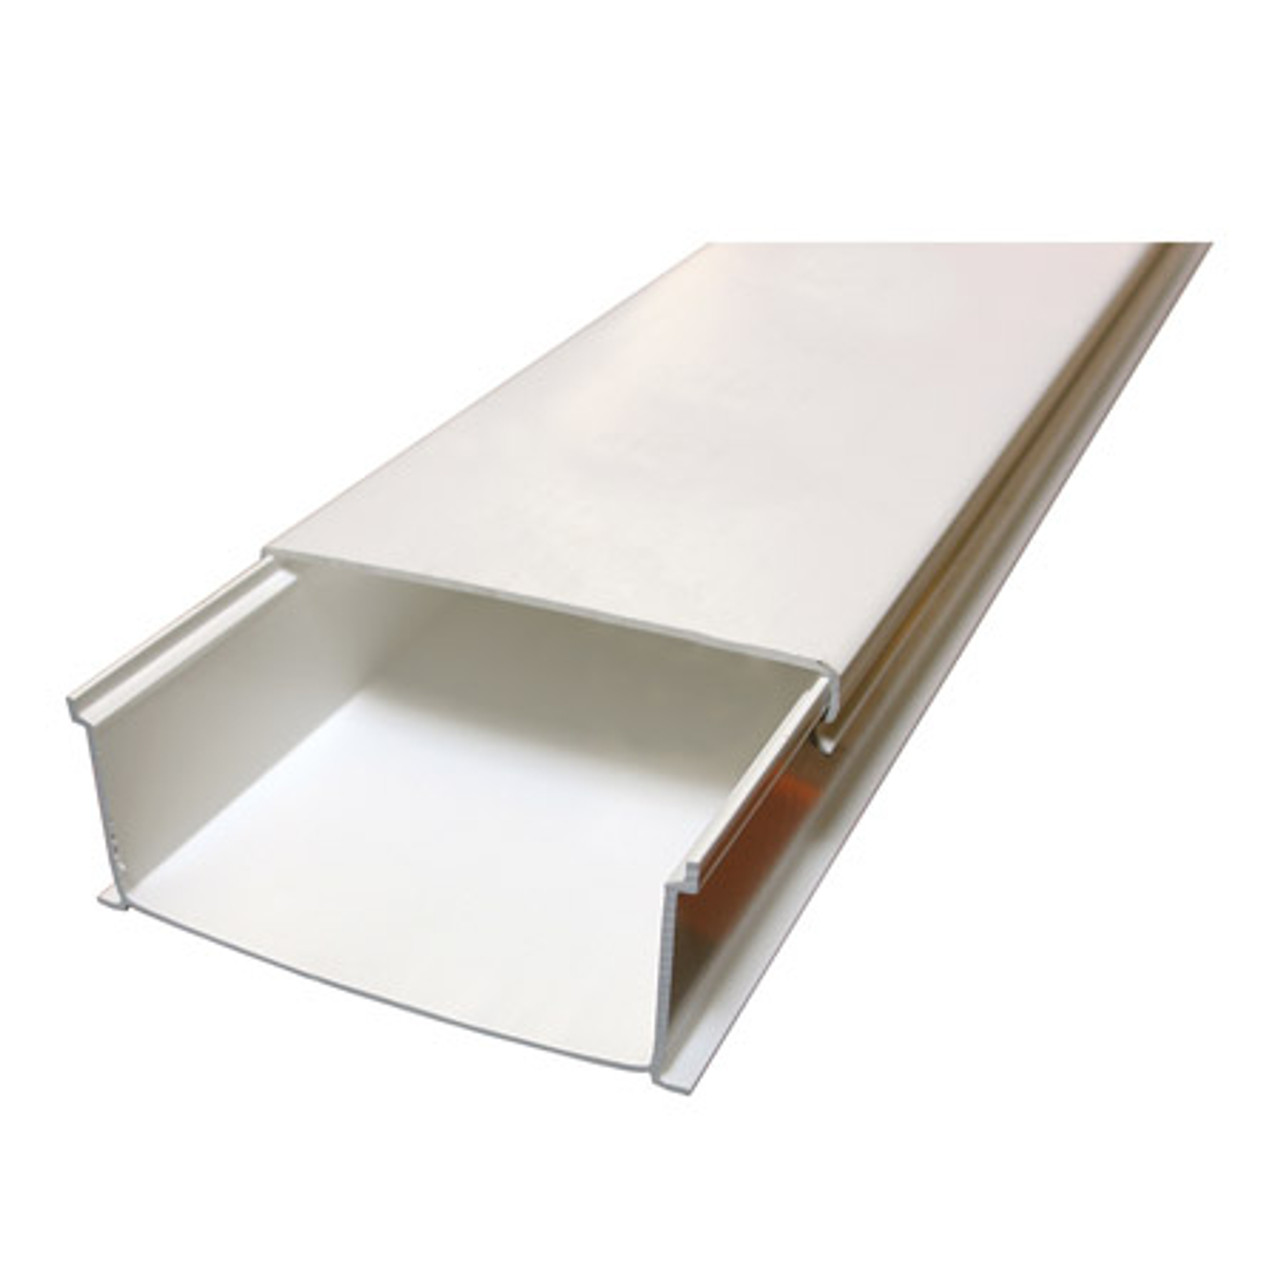 SURE-GRO SG - 80MM X 225MM LID ONLY THREE METRE LENGTH